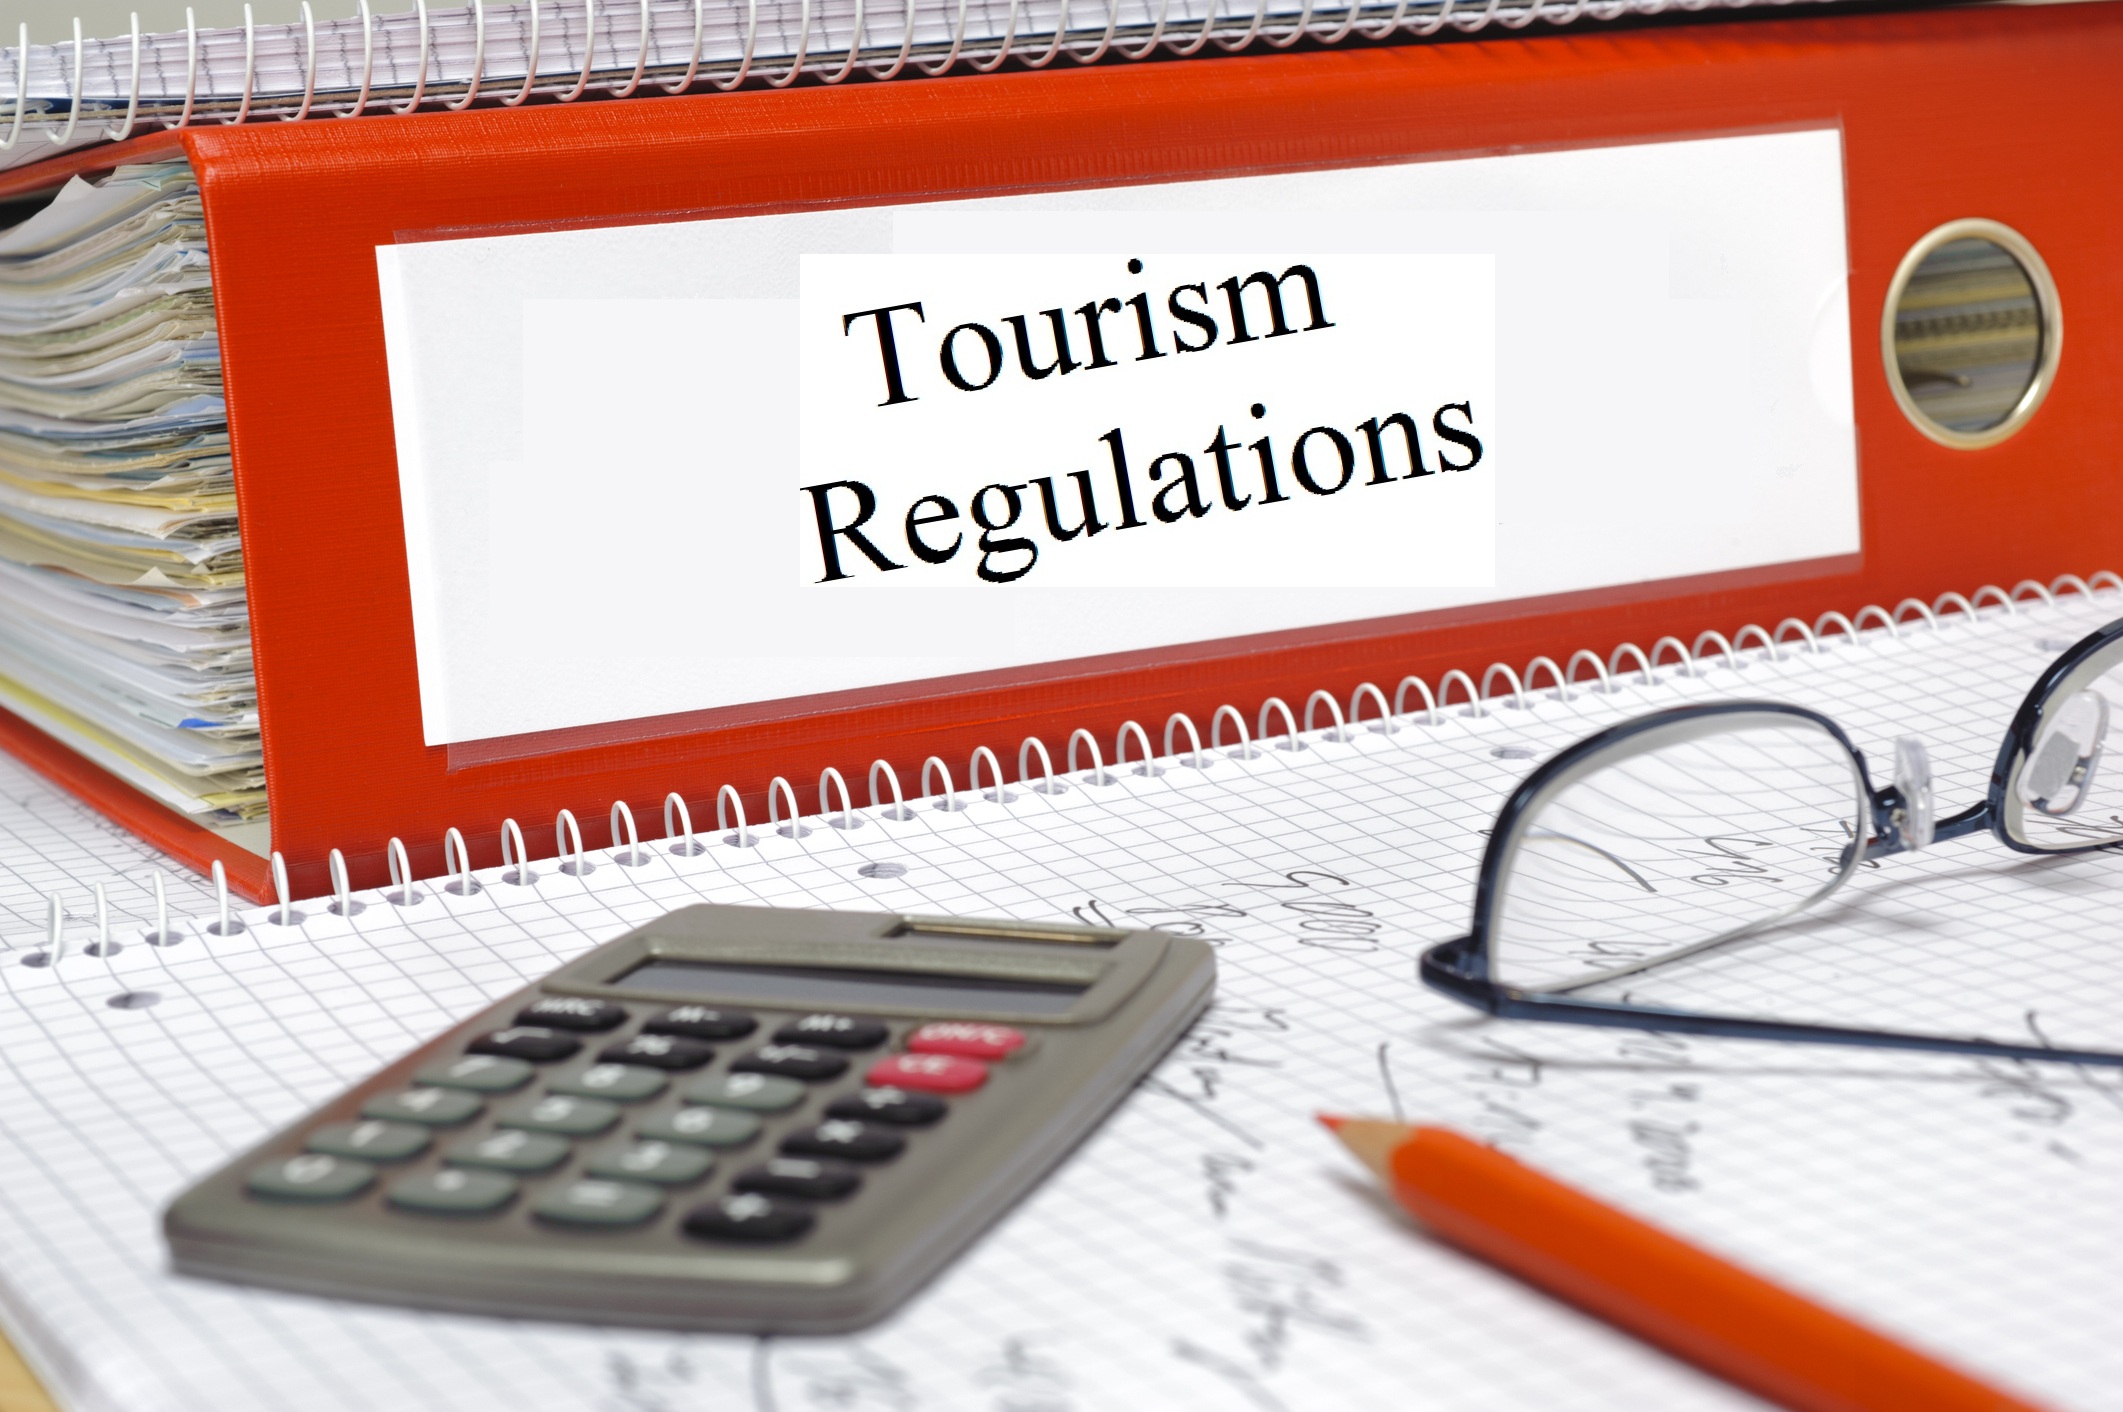 Joint Workgroup to Review, Enforce Tourism Regulations Financial Tribune